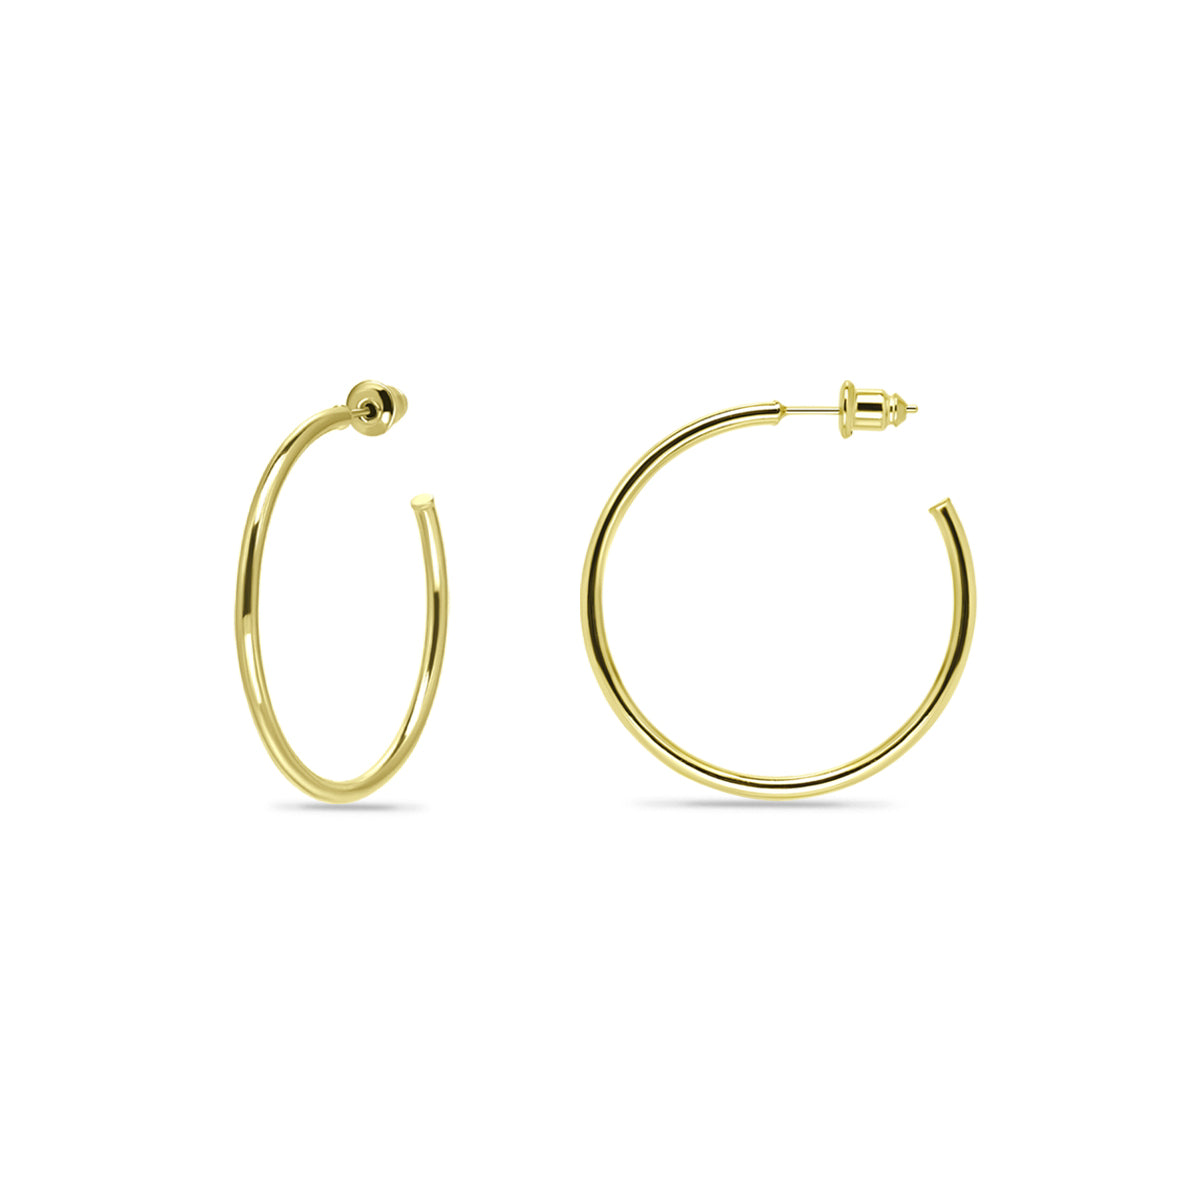 14K Gold Plated Lightweight Open Hoop Earrings with Sterling Silver Posts